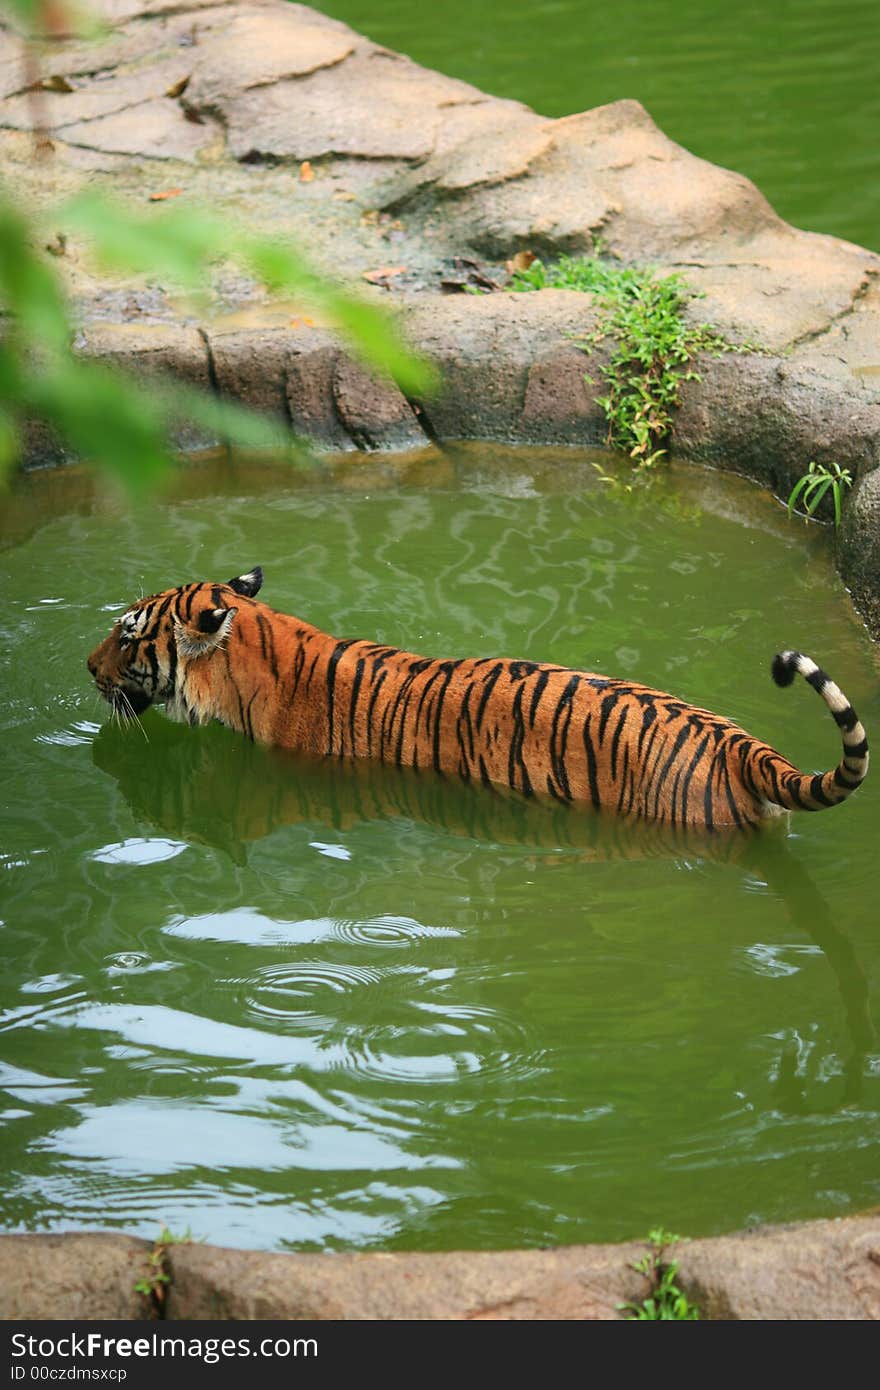 Until 2004, there were eight conventional classification of tigers. However, a test of the DNA of more than 130 tigers and tiger pelts raised sufficient evidence to classify the tigers in Malaysia a separate sub-species. Hence, the Malayan Tiger was re-born as the ninth tiger sub-species. Until 2004, there were eight conventional classification of tigers. However, a test of the DNA of more than 130 tigers and tiger pelts raised sufficient evidence to classify the tigers in Malaysia a separate sub-species. Hence, the Malayan Tiger was re-born as the ninth tiger sub-species.